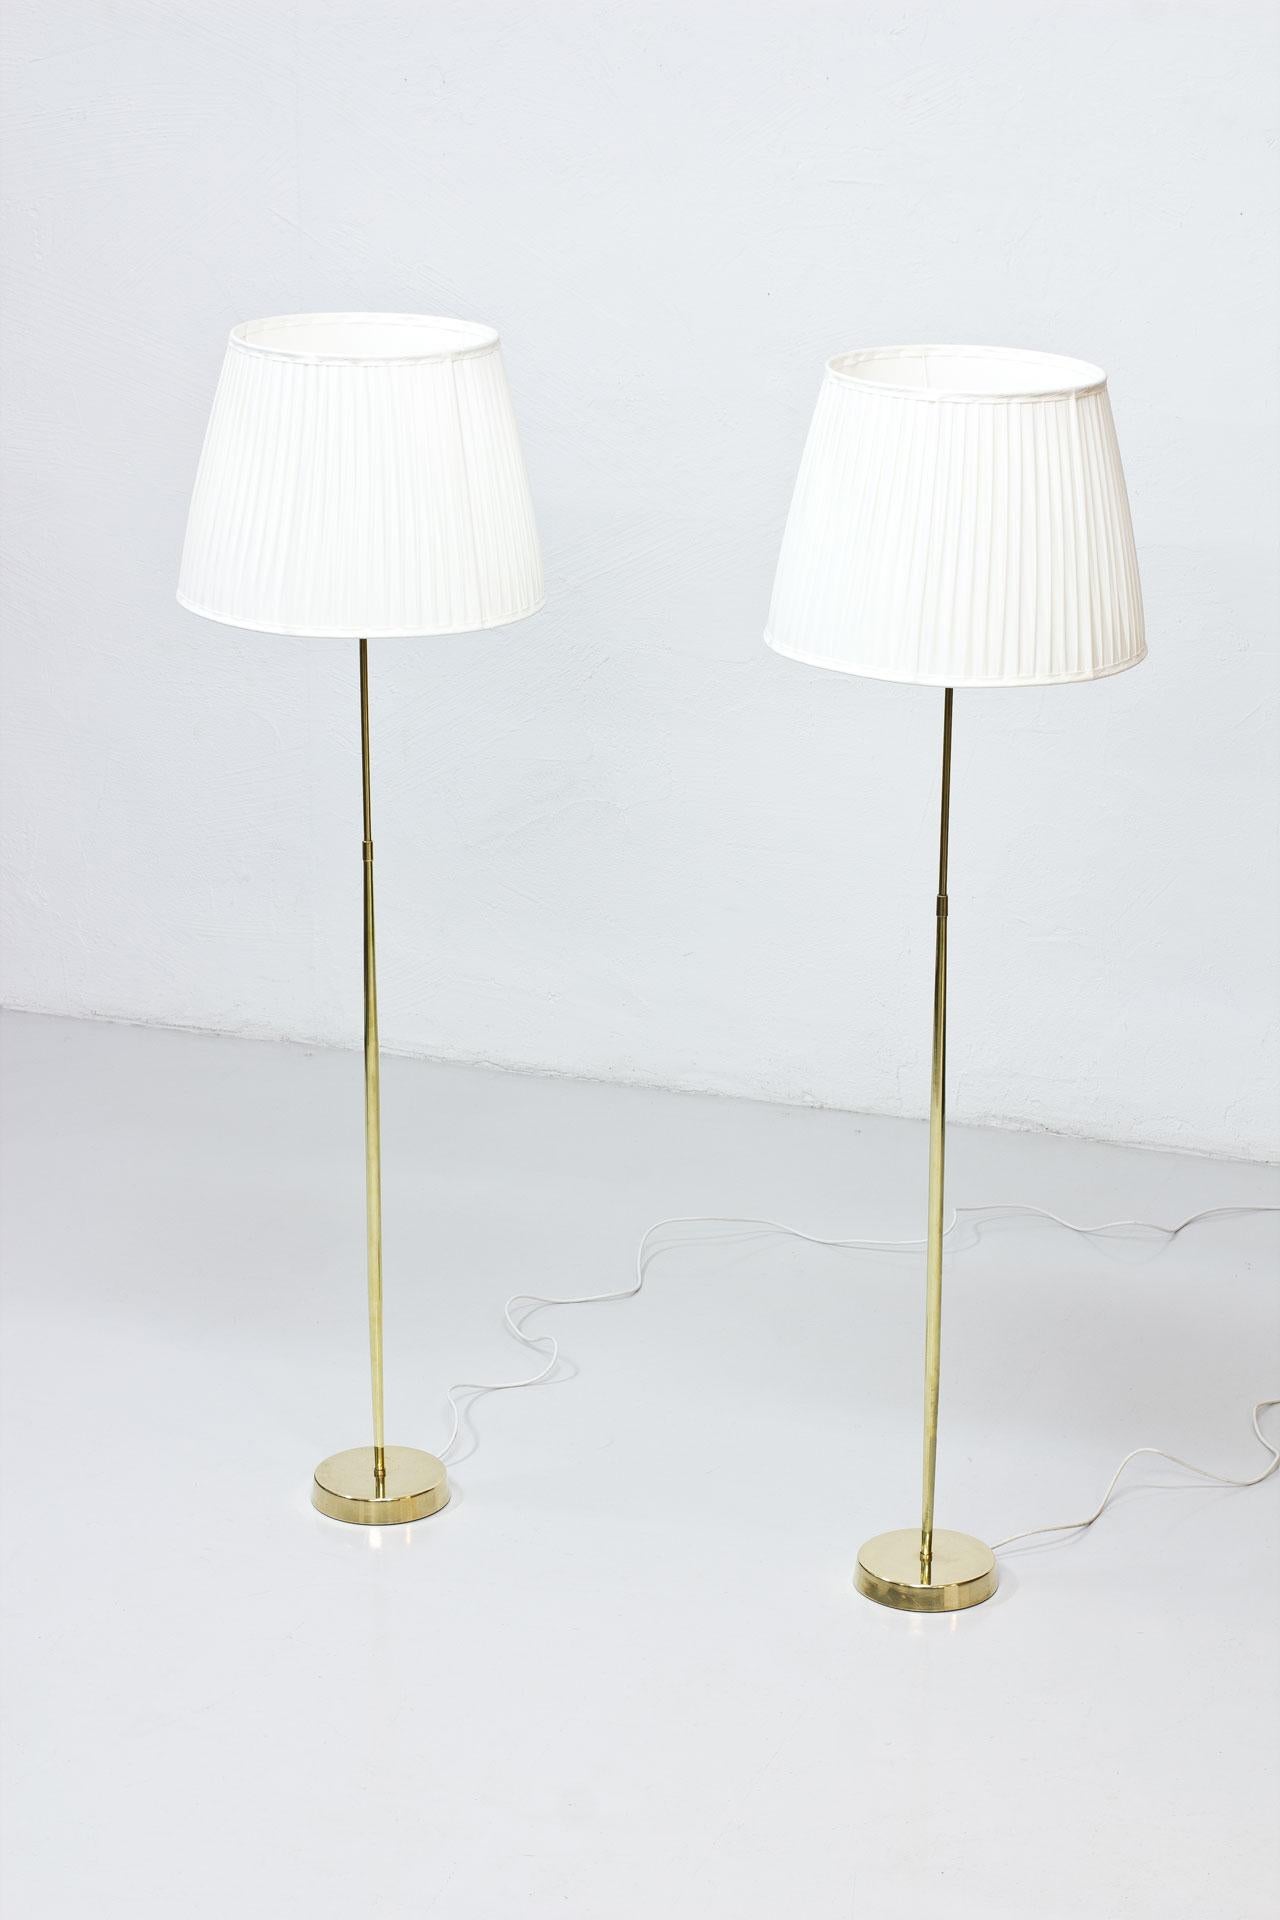 Scandinavian Modern Pair of ASEA Belysning Brass Floor Lamps, 1950s, Hand-Pleated Chintz Shades For Sale